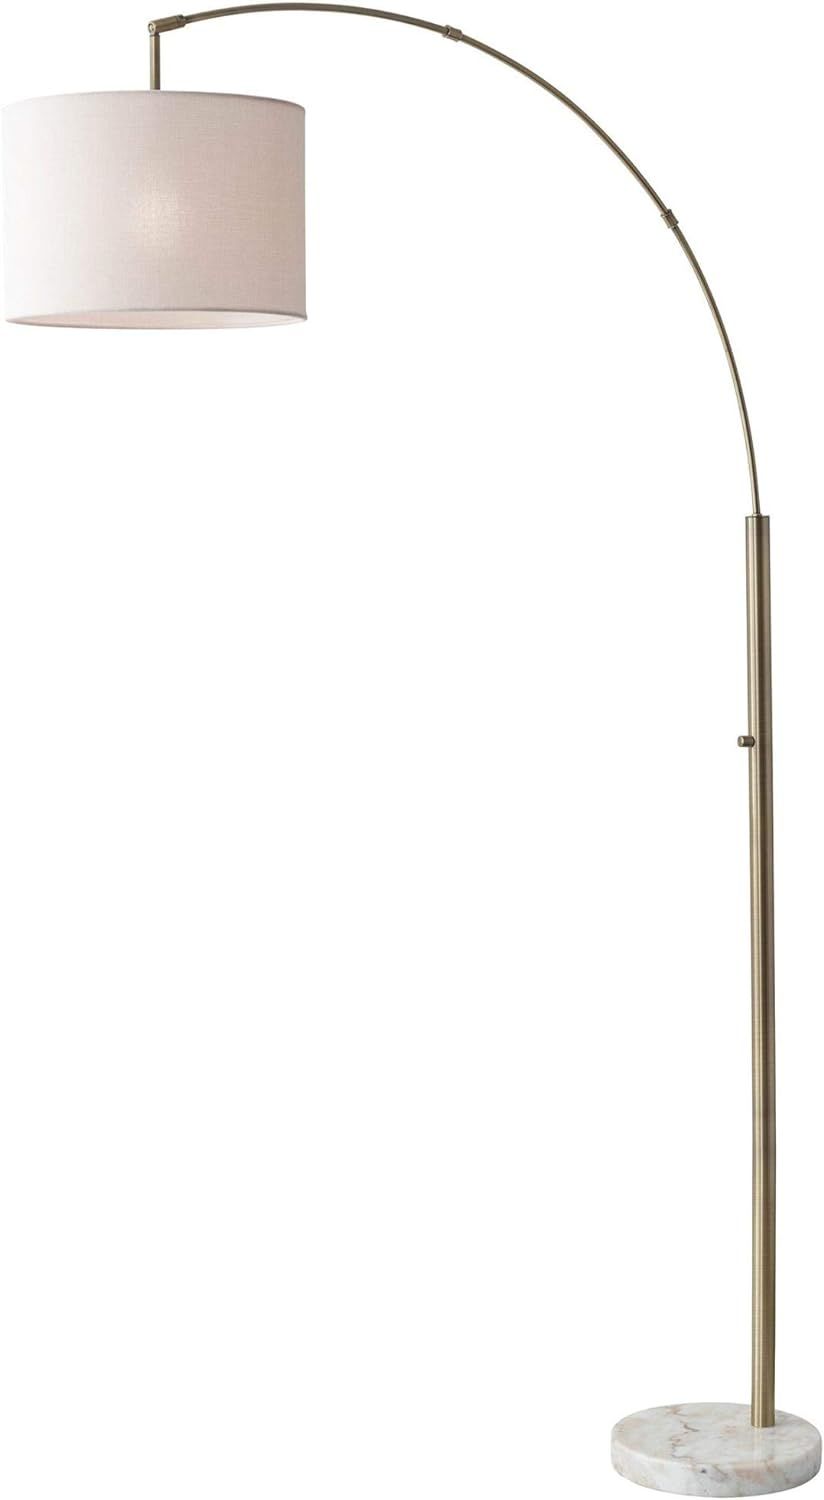 Adesso 4249-21 Bowery Arc Lamp, 73.5 in, 100W Incandescent/26W CFL, Antique Brass Finish, 1 Floor... | Amazon (US)